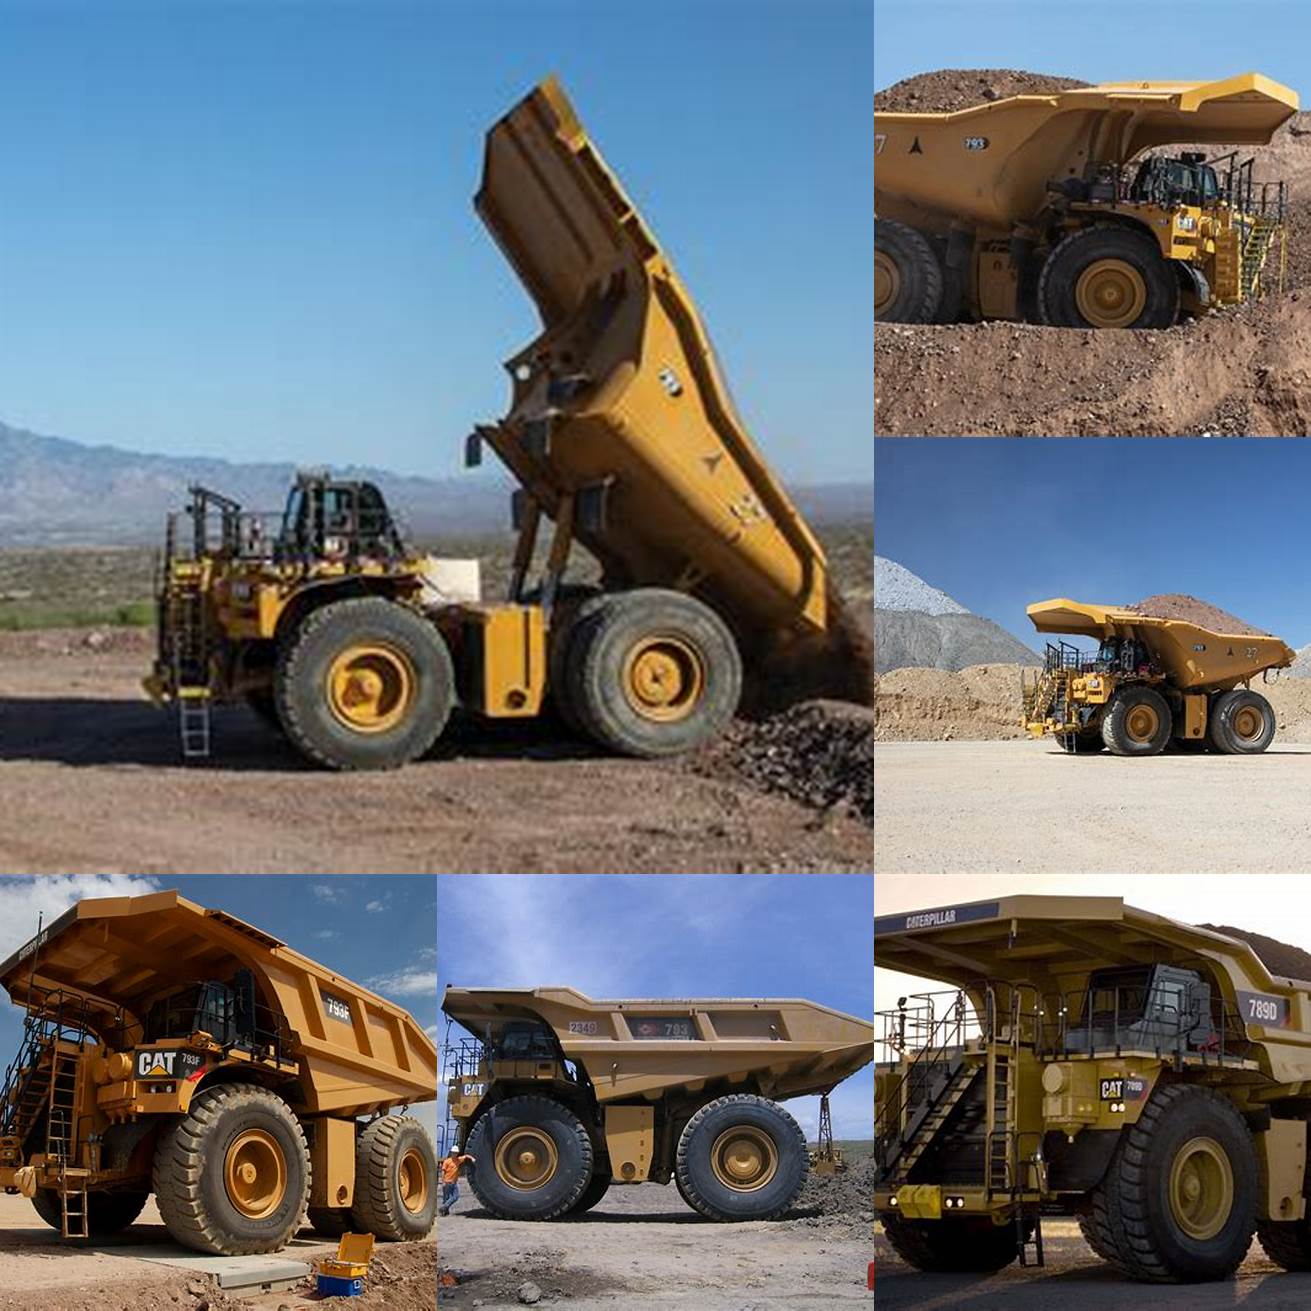 Q How long does it take to train an operator to run the Cat 793 haul truck